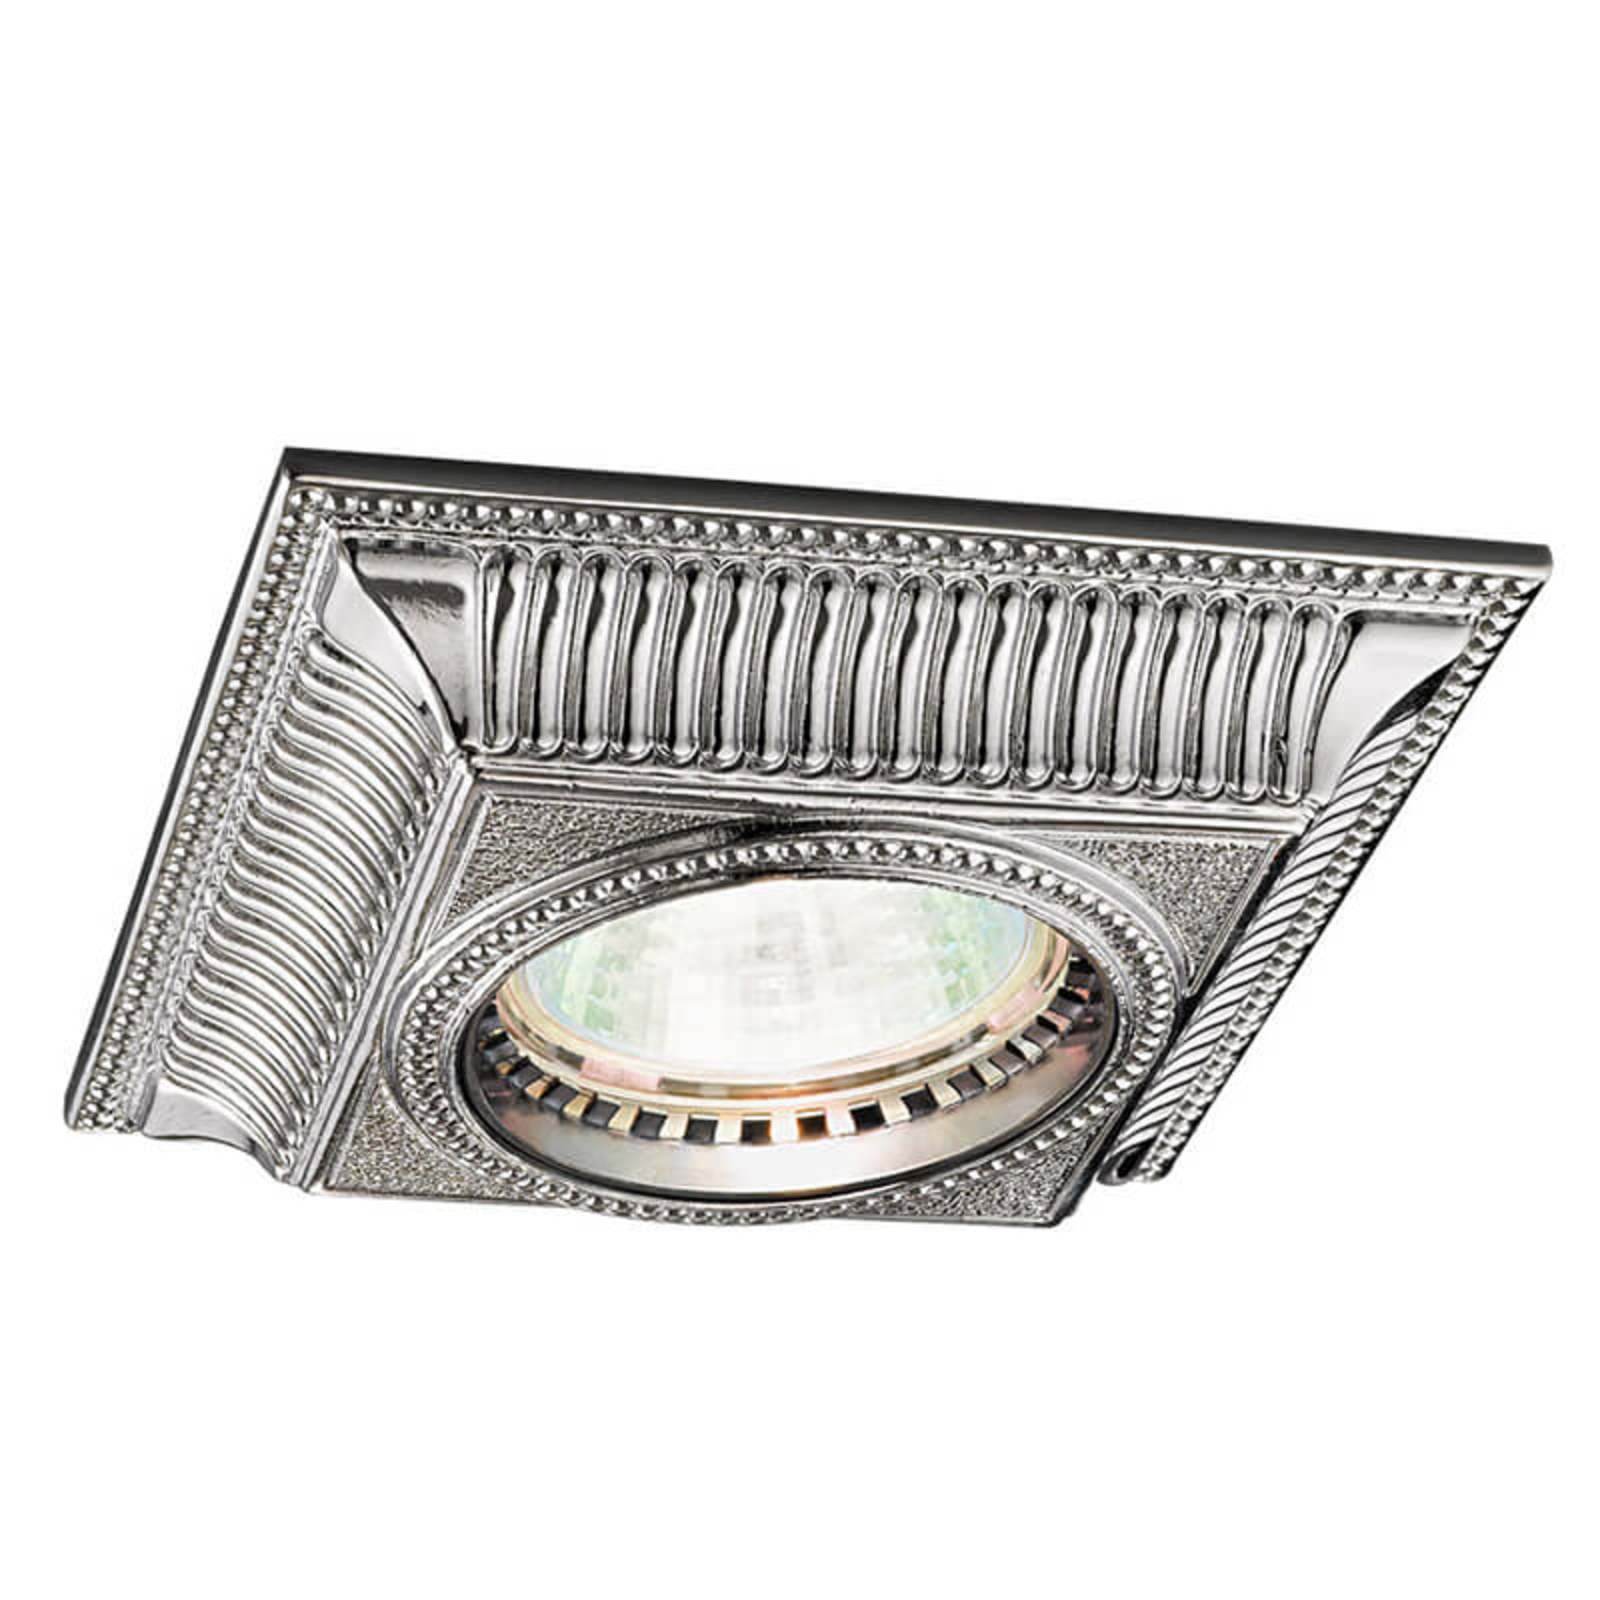 Selected Milord recessed light